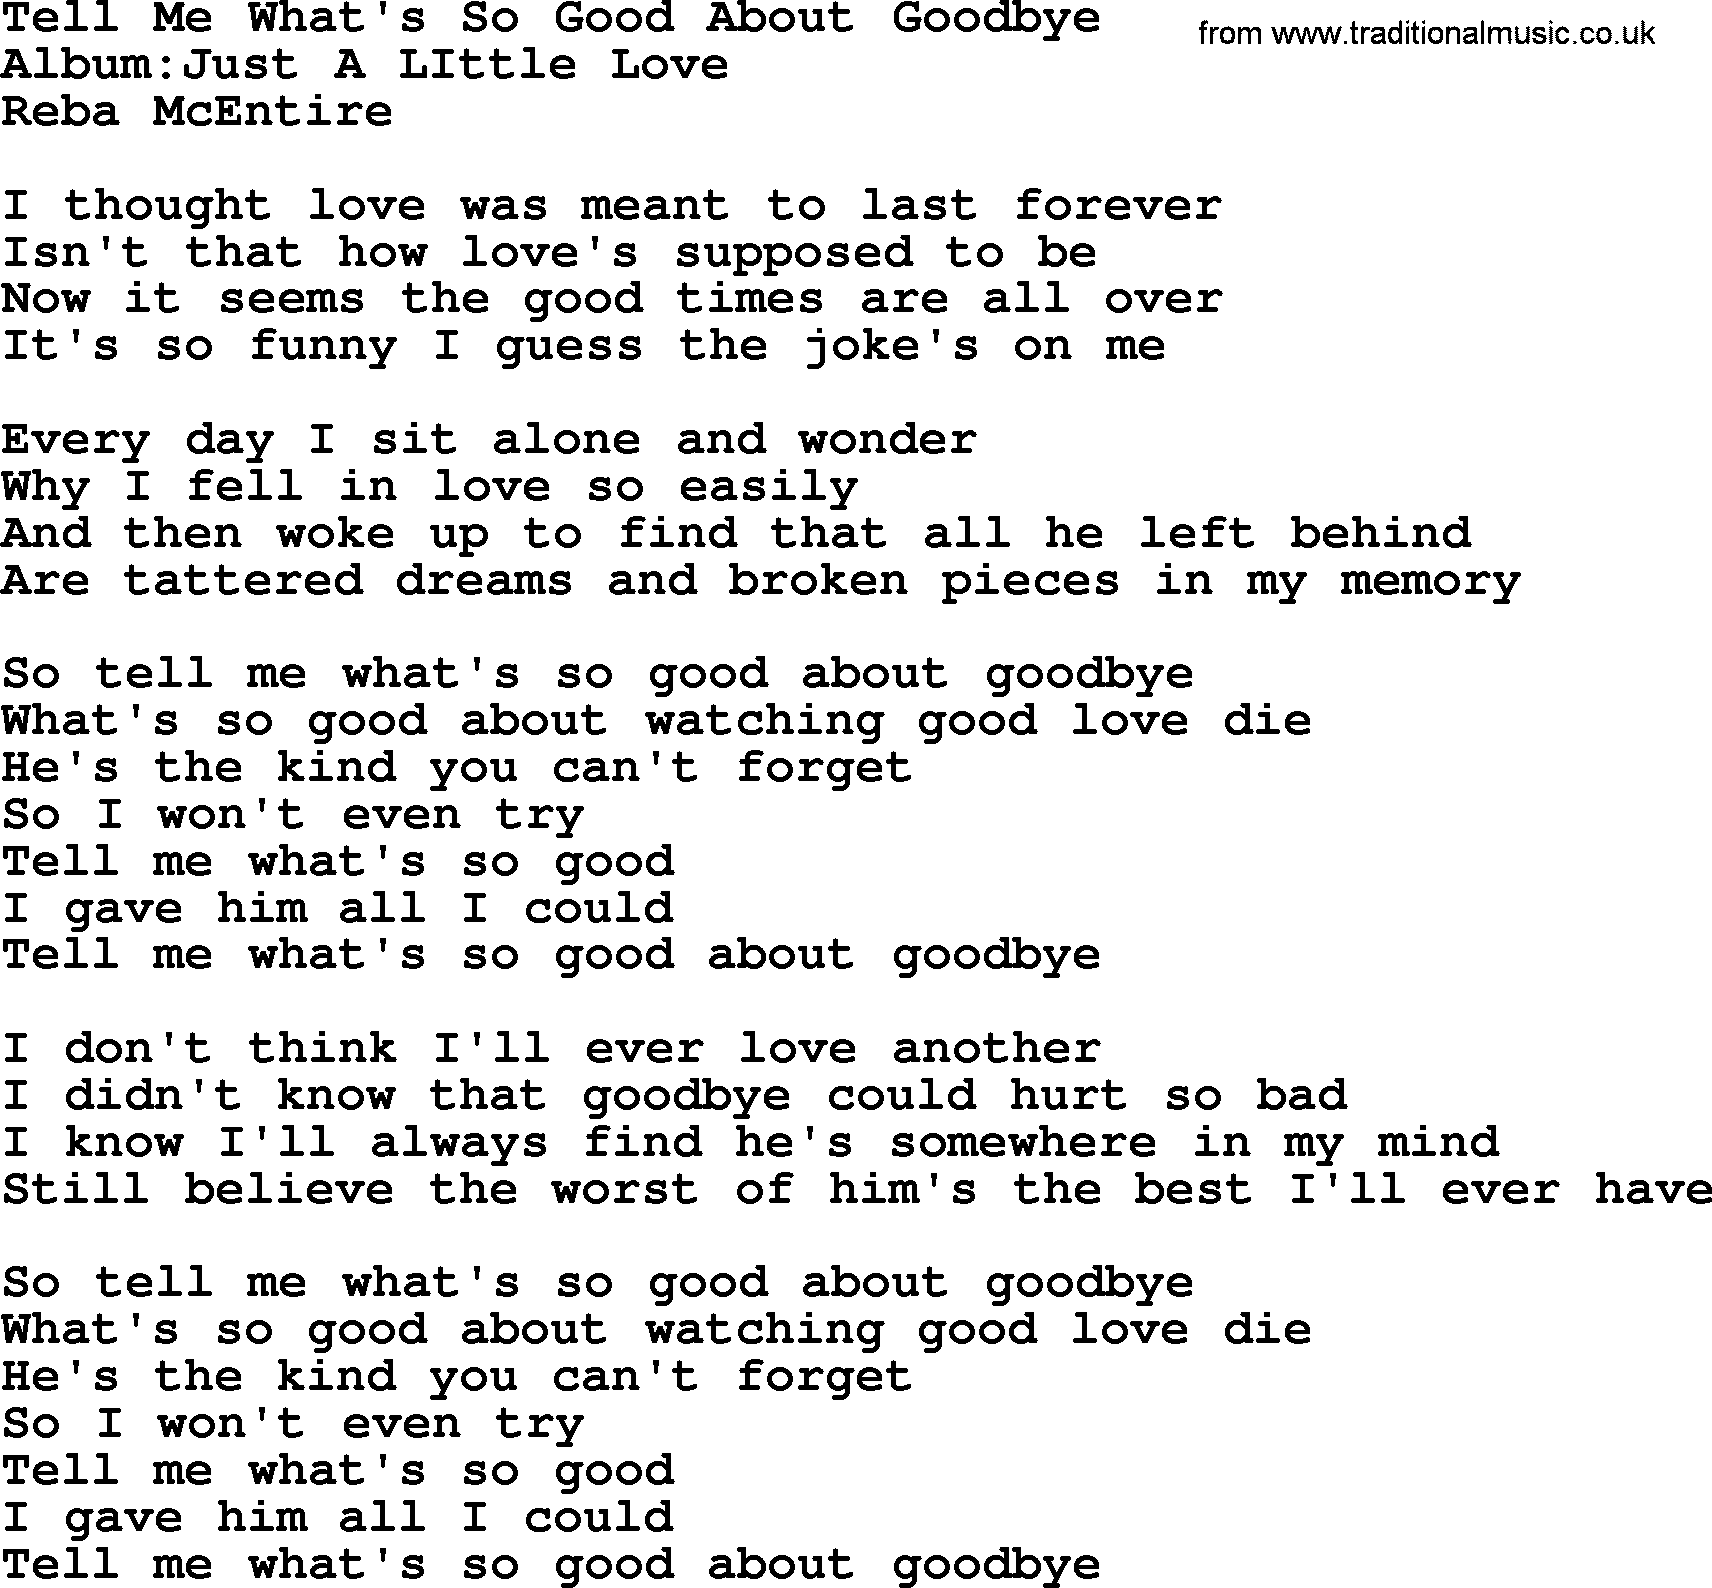 Reba McEntire song: Tell Me What's So Good About Goodbye lyrics